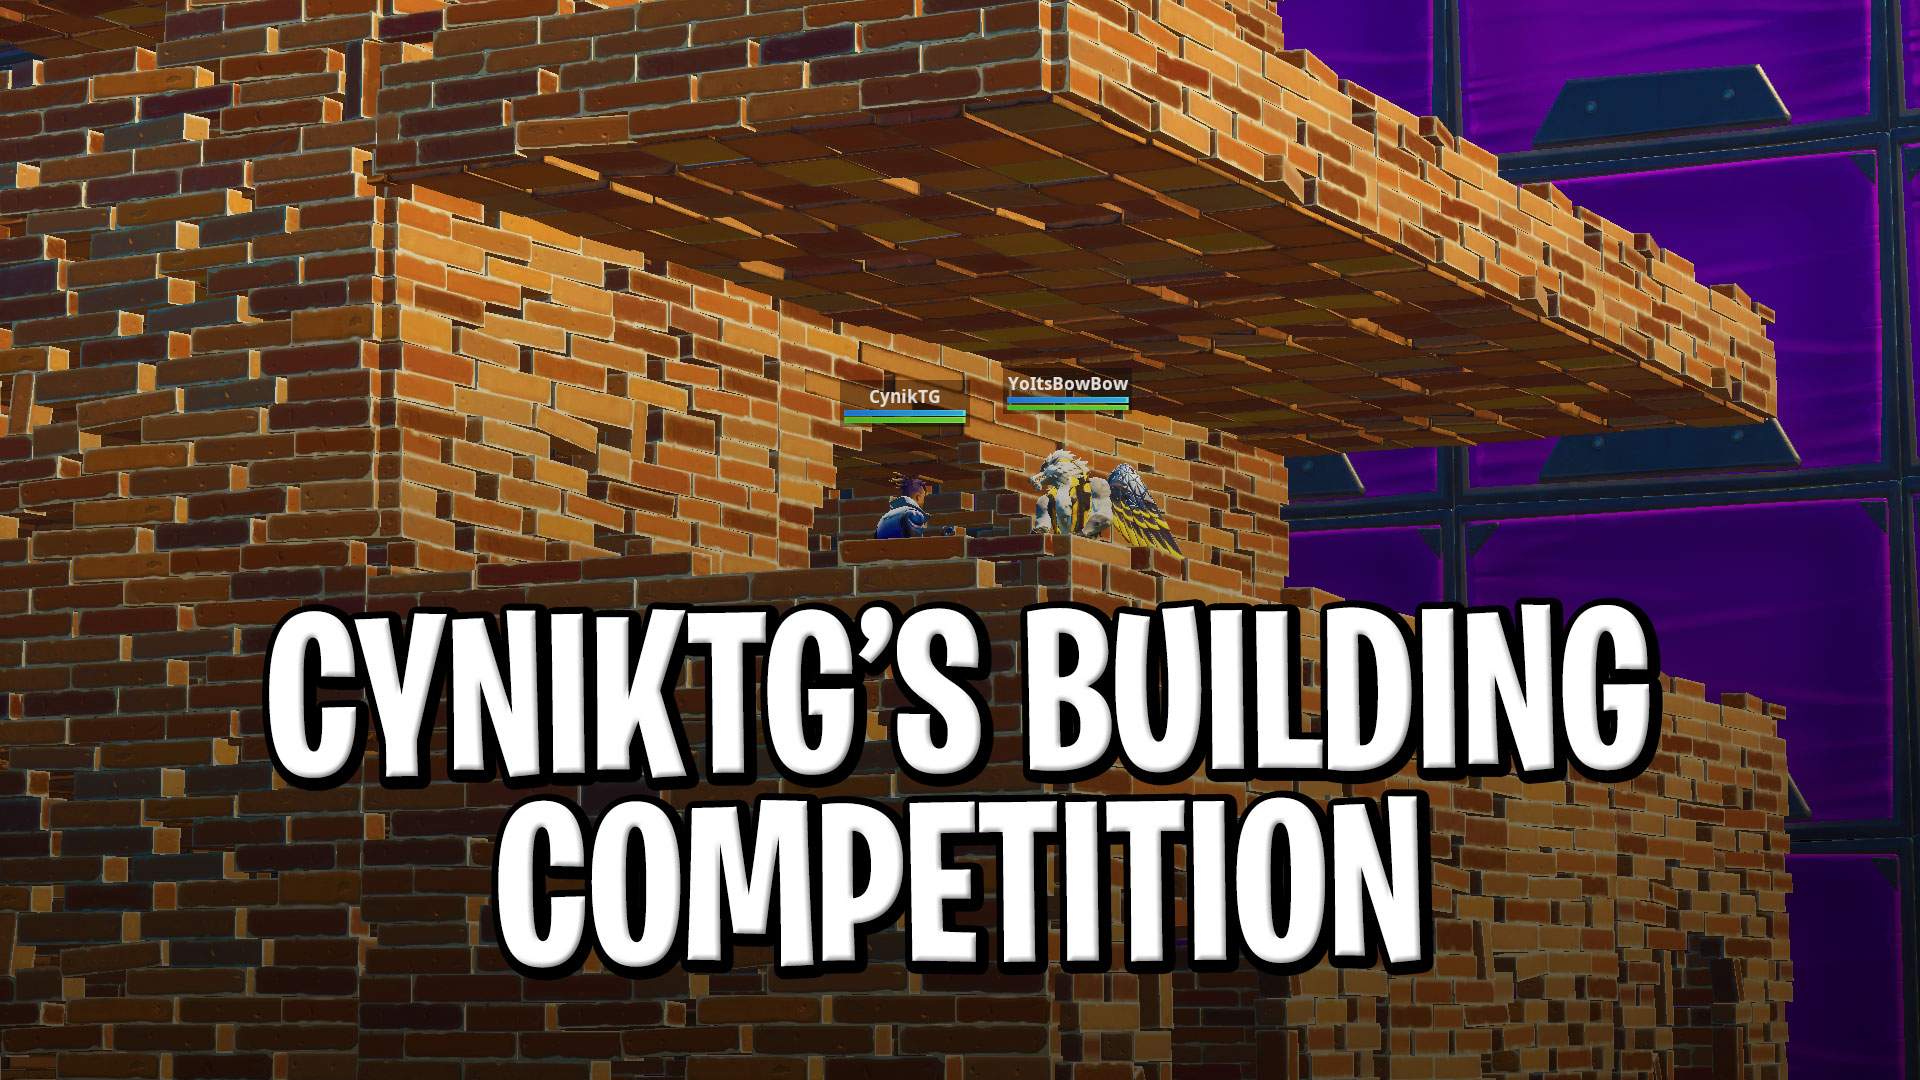 CYNIKTG'S BUILDING COMPETITION